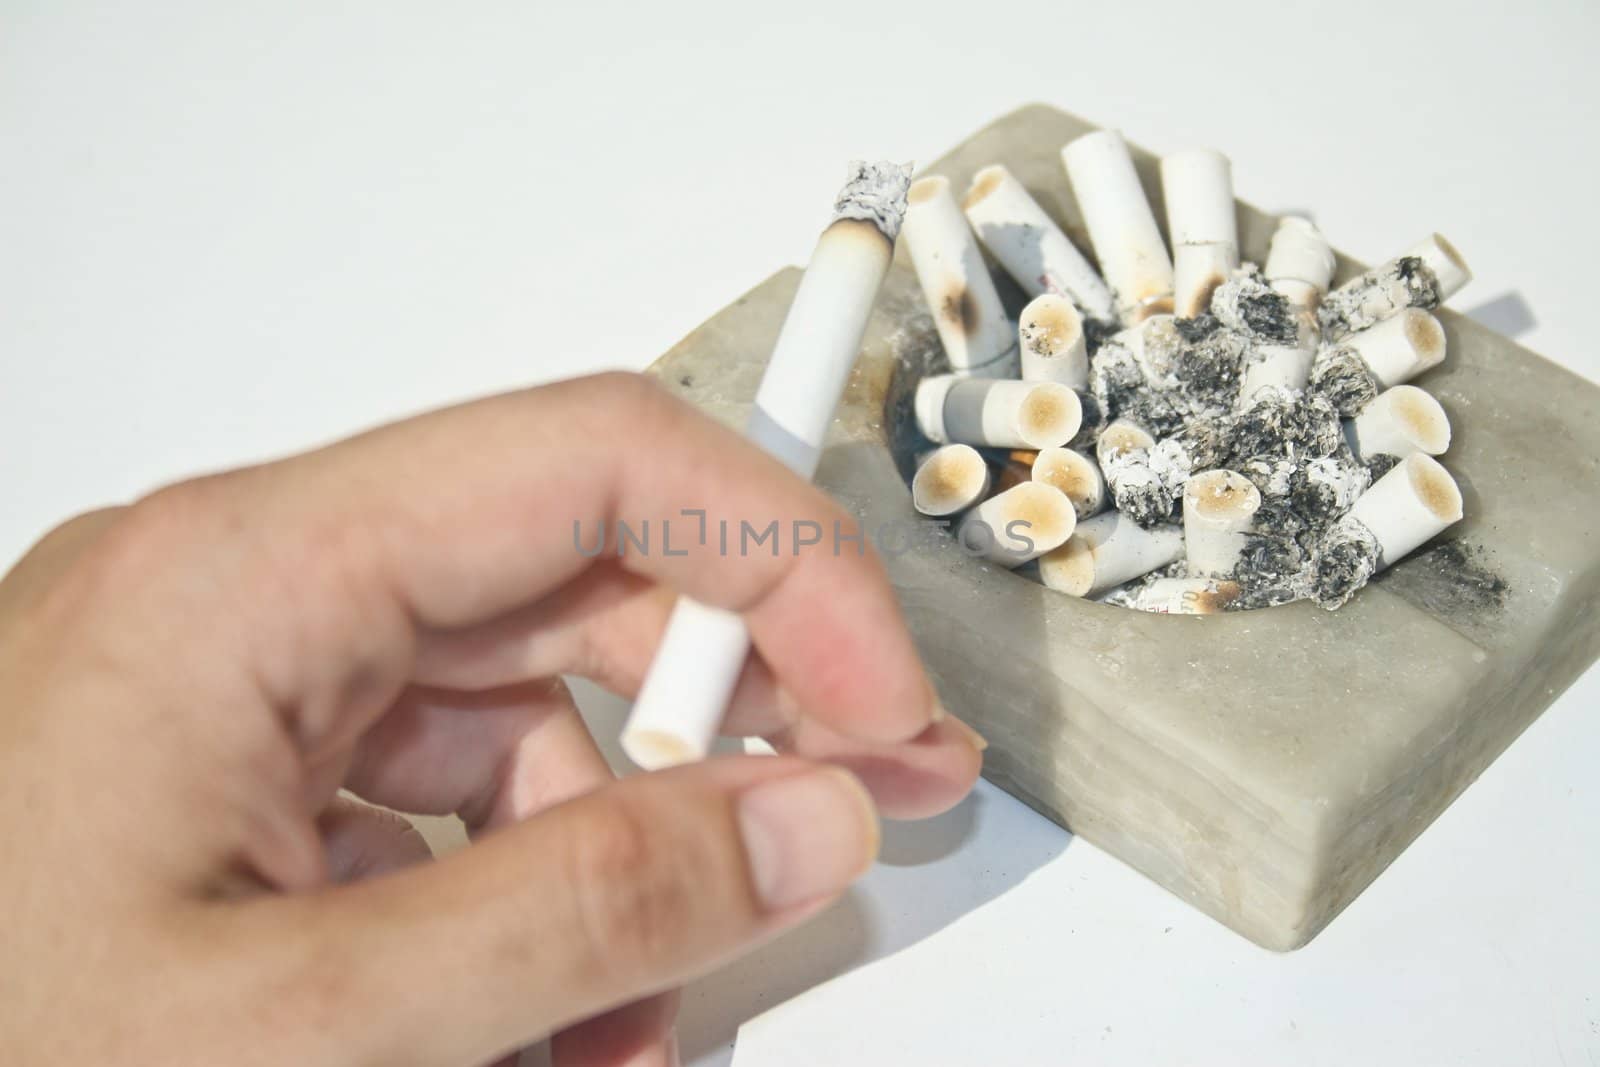 Close-up of a white stone square ashtray full of burnt butts, a hand ashing into it